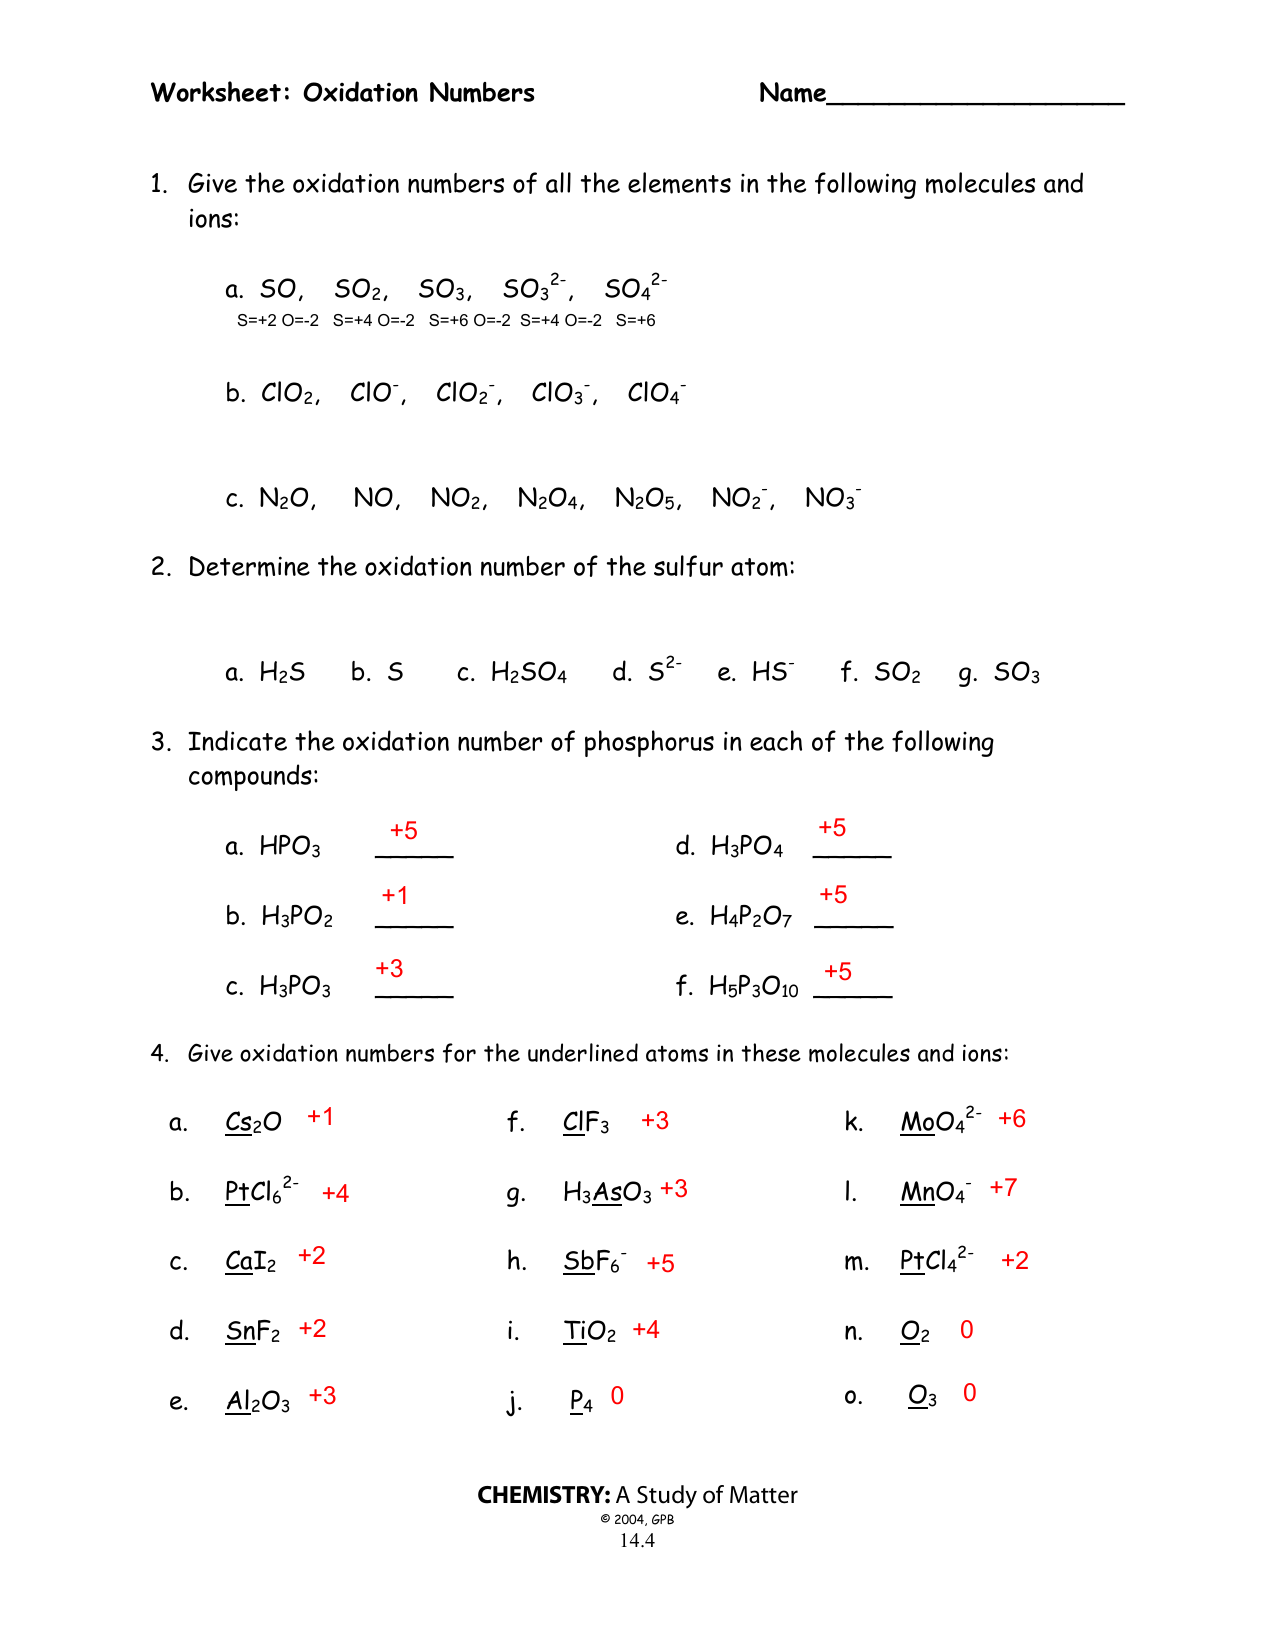 Worksheet Oxidation Numbers Answer Key